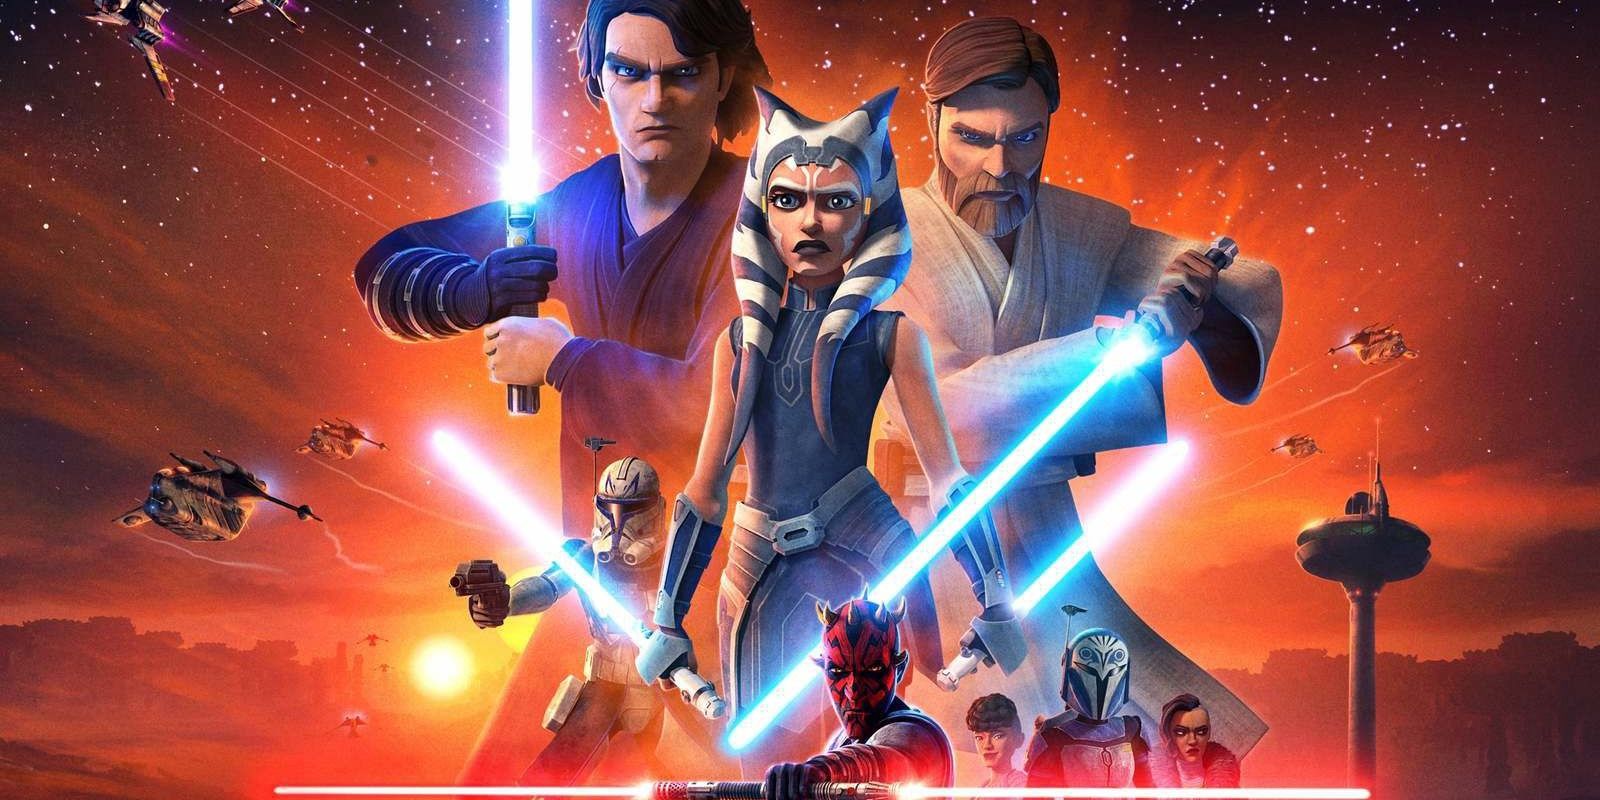 Poster for the Star Wars: The Clone Wars TV series